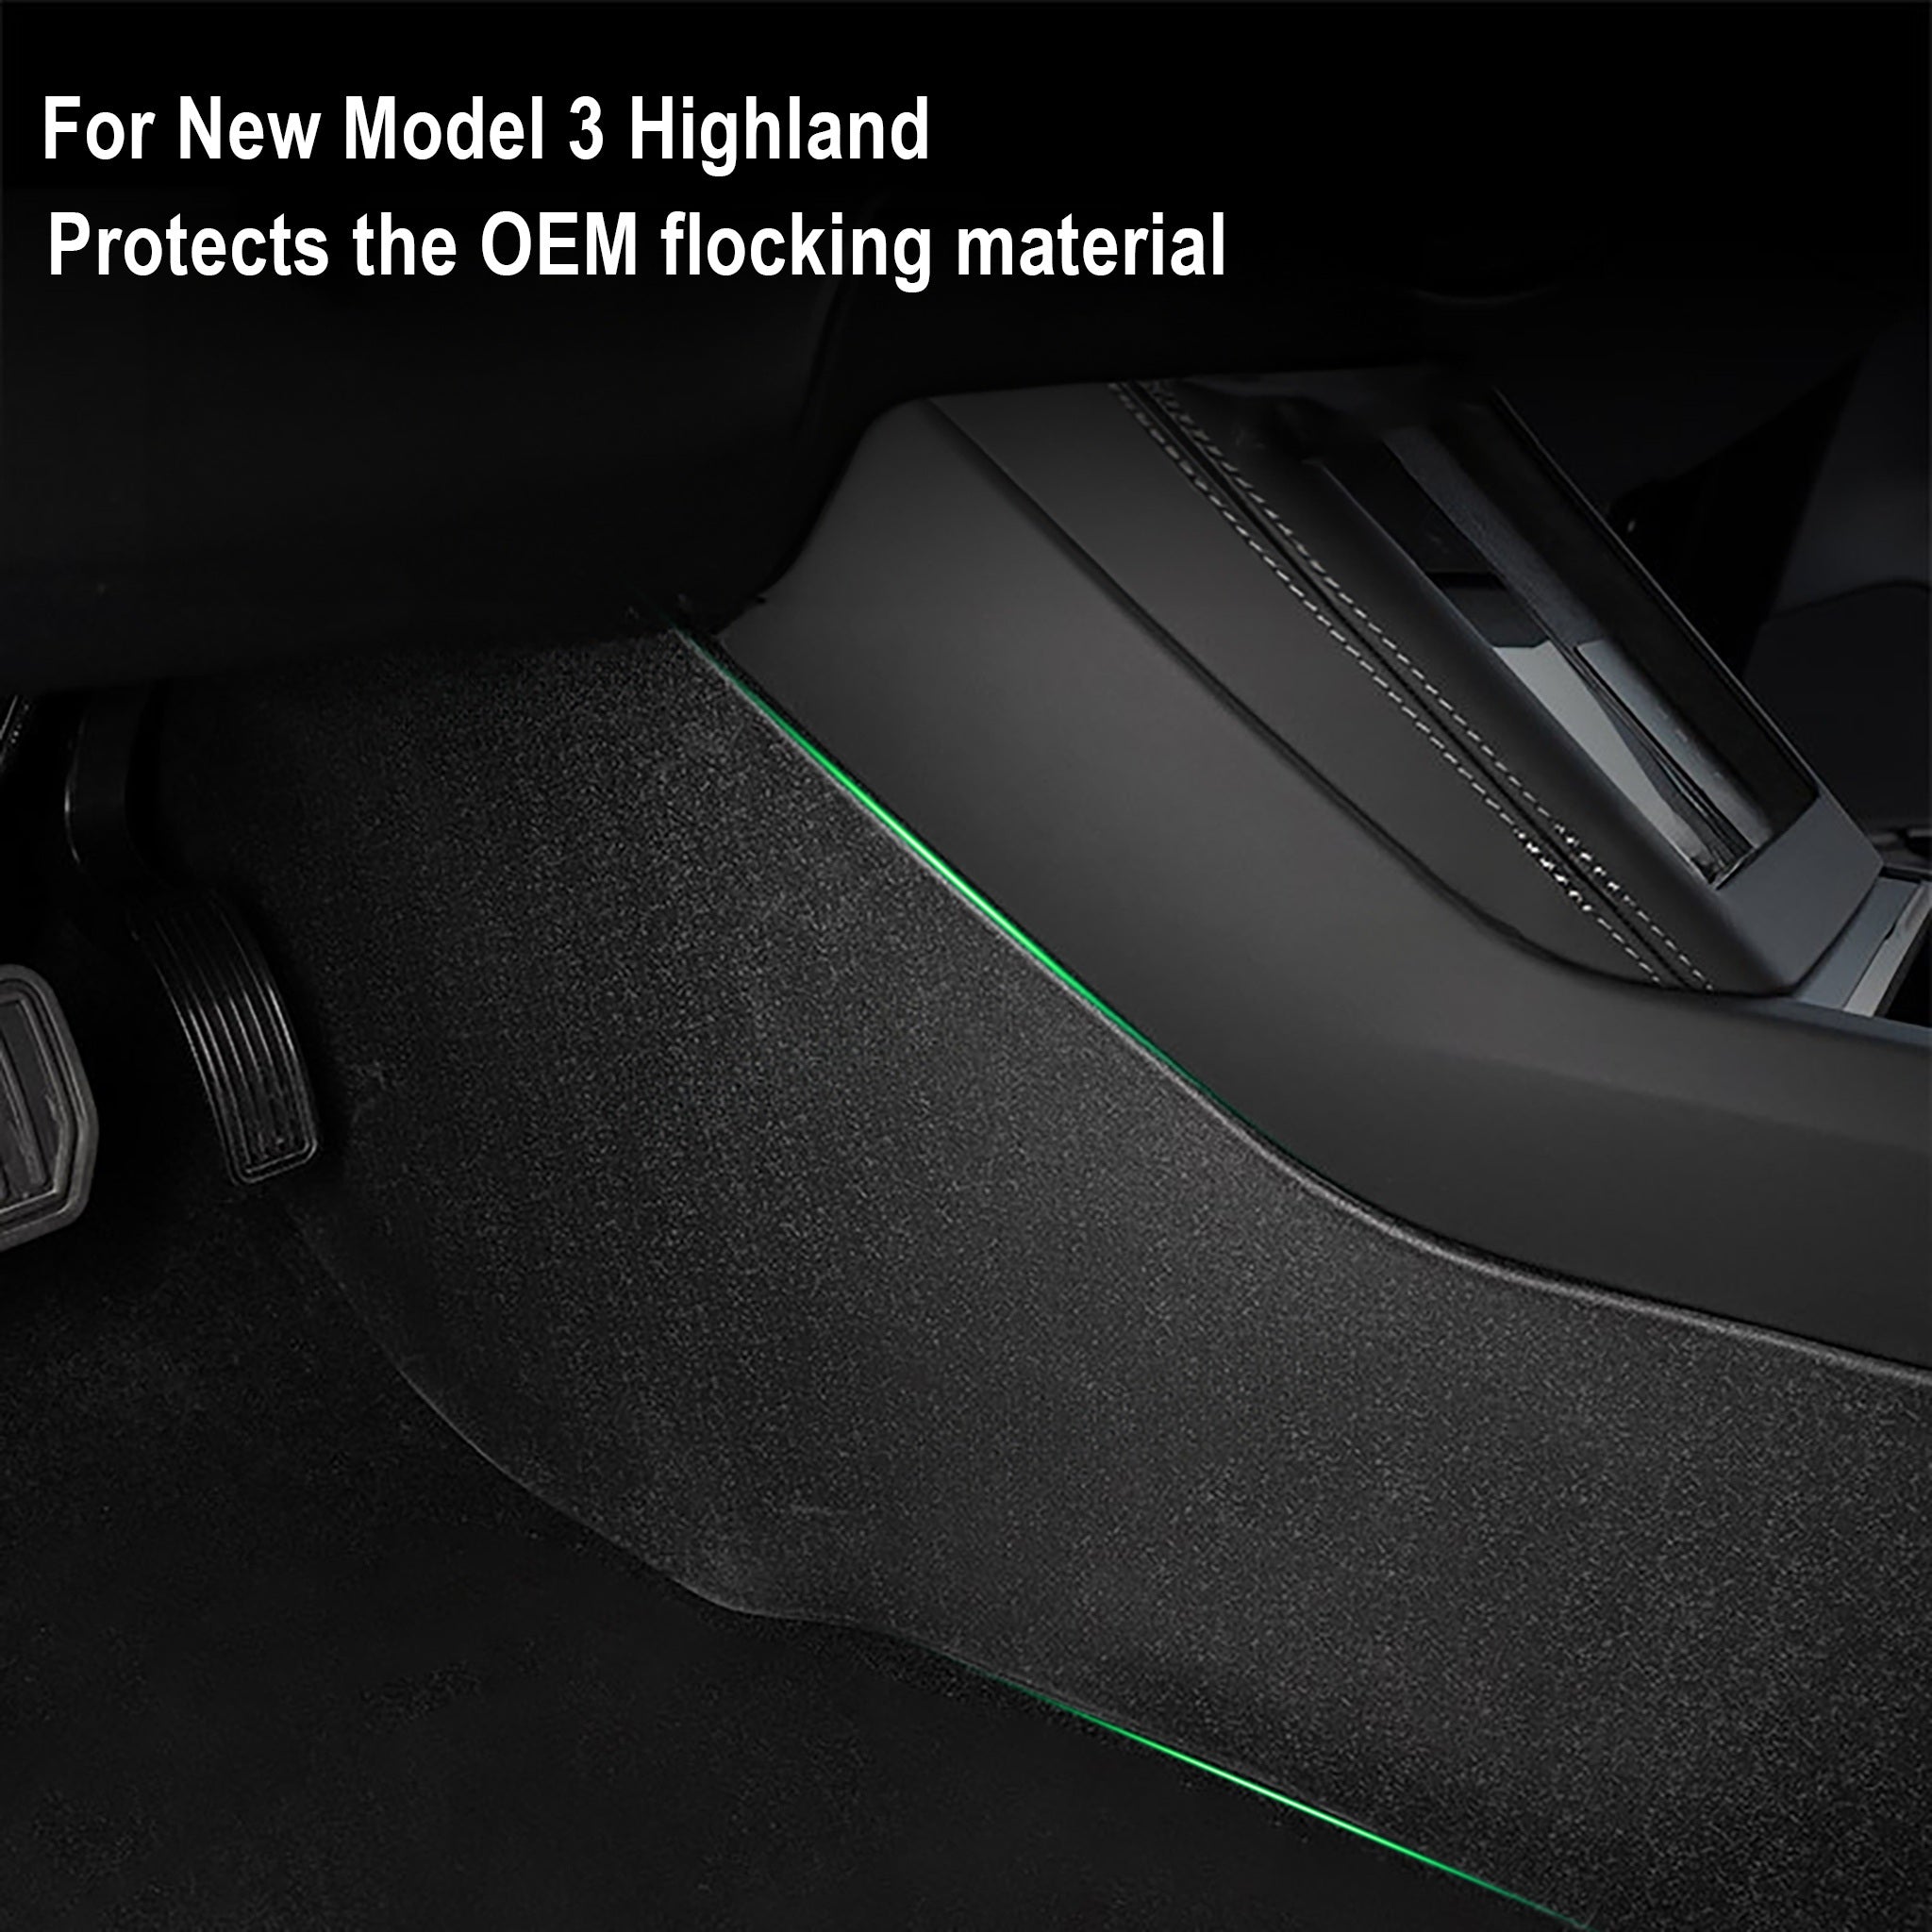 Center Console Side Cover Protectors for Tesla New Model 3 Highland